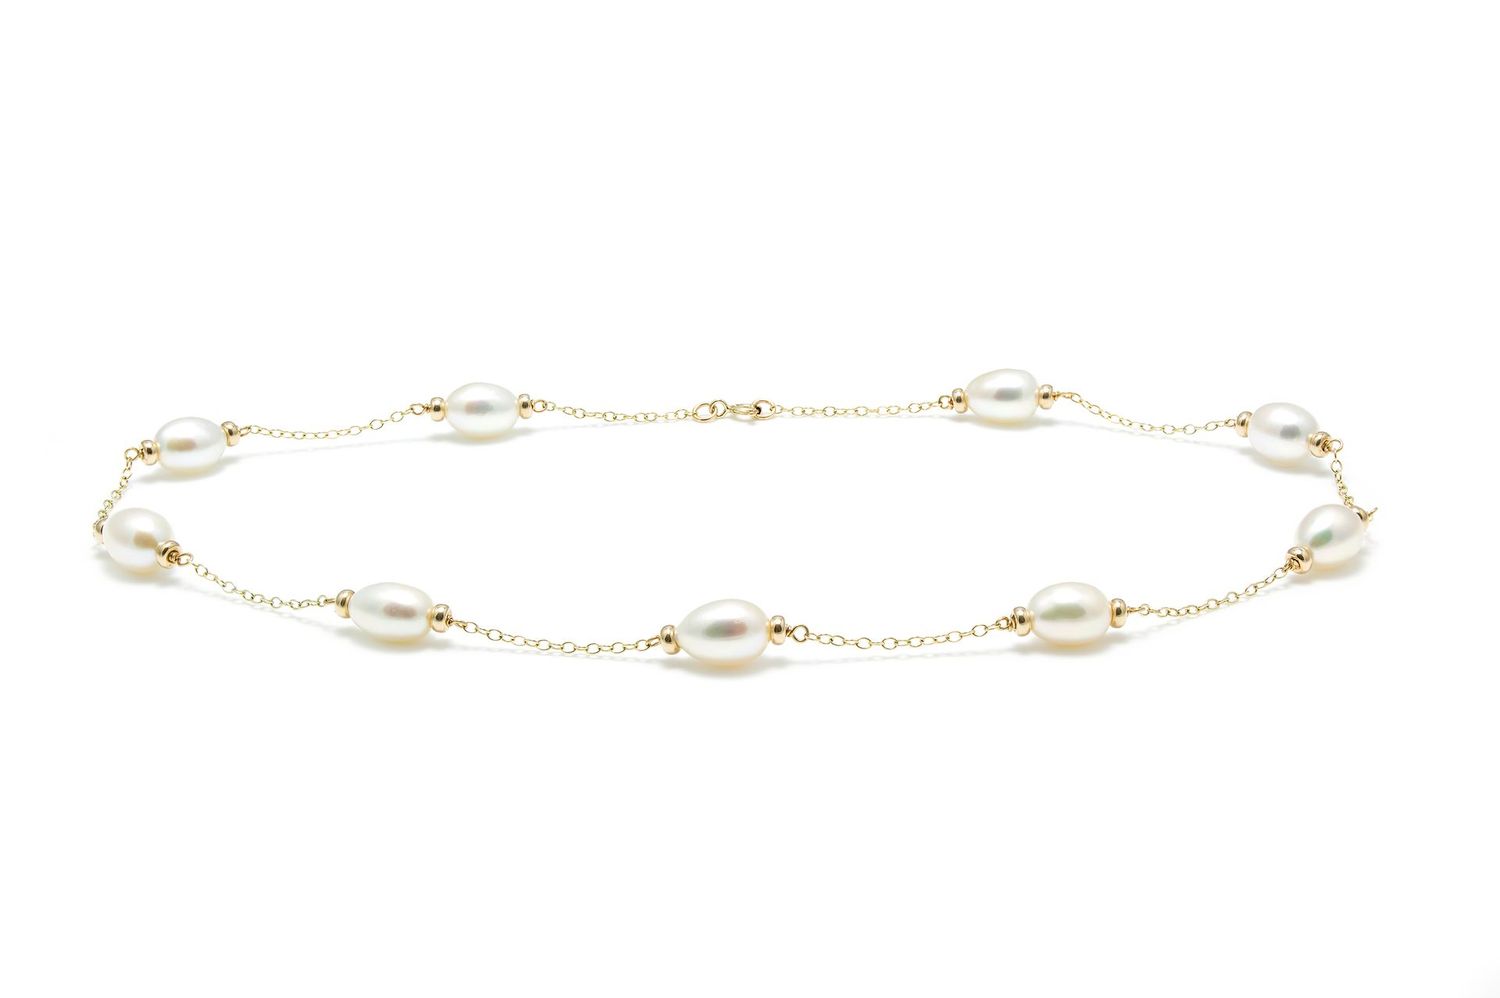 A 9 Carat Gold Cultured River Pearl Necklace